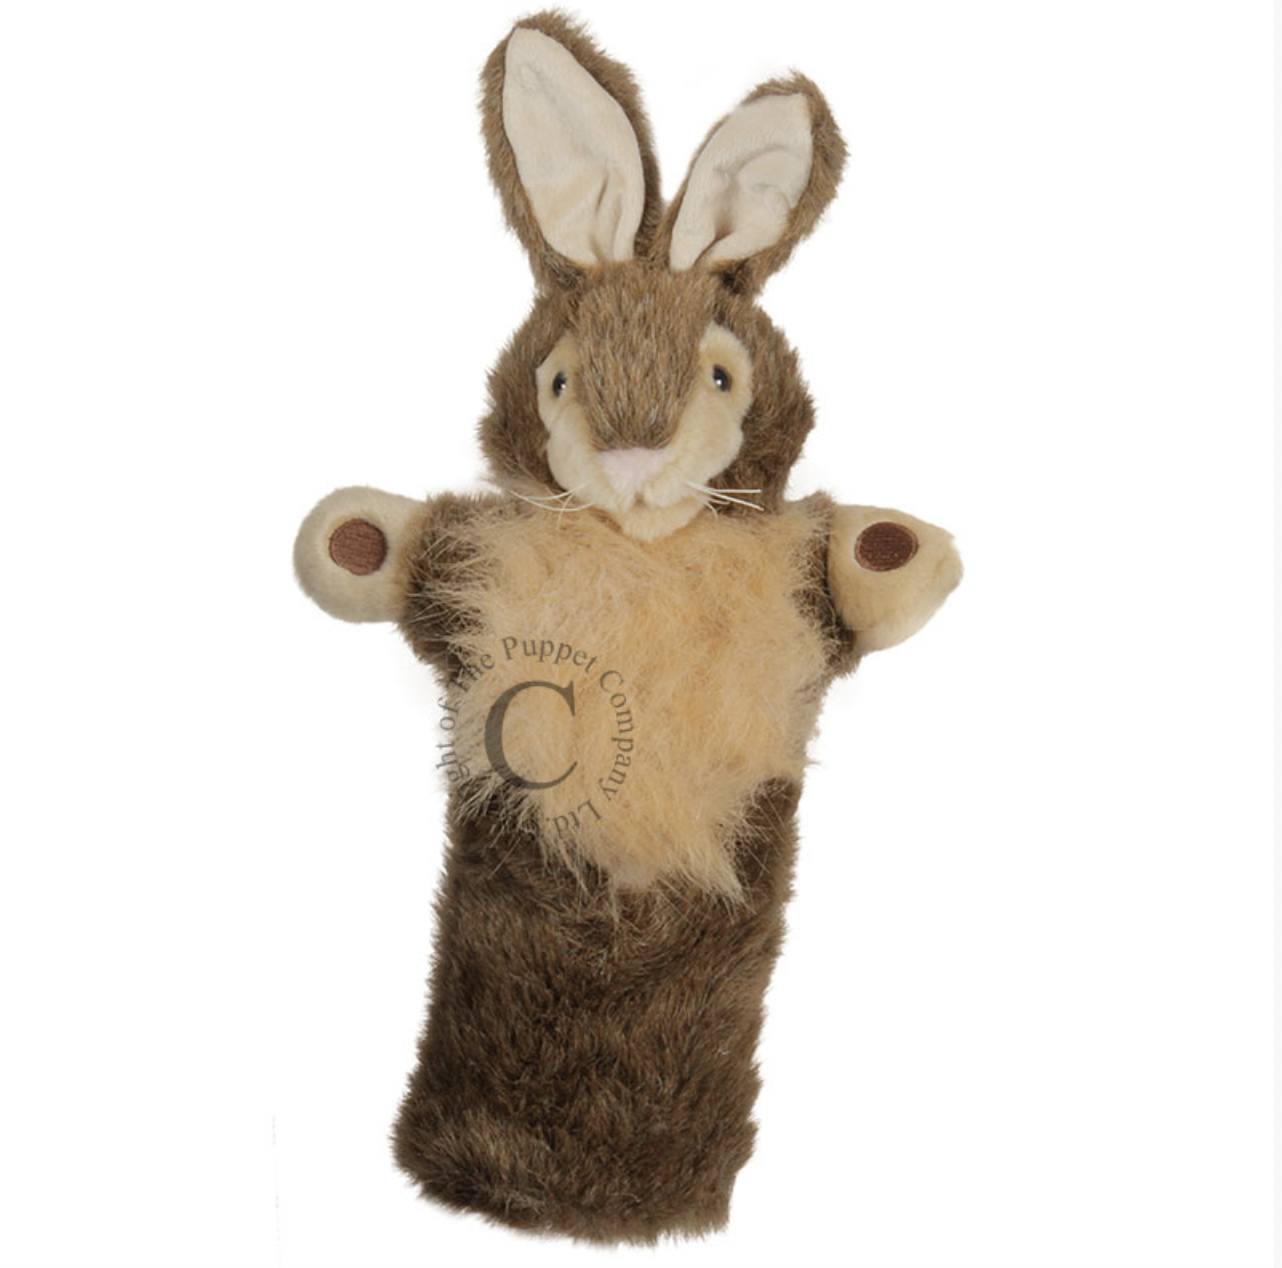 Wild Rabbit Long Sleeve Hand Puppet - Tiddlywinks Toys And Games